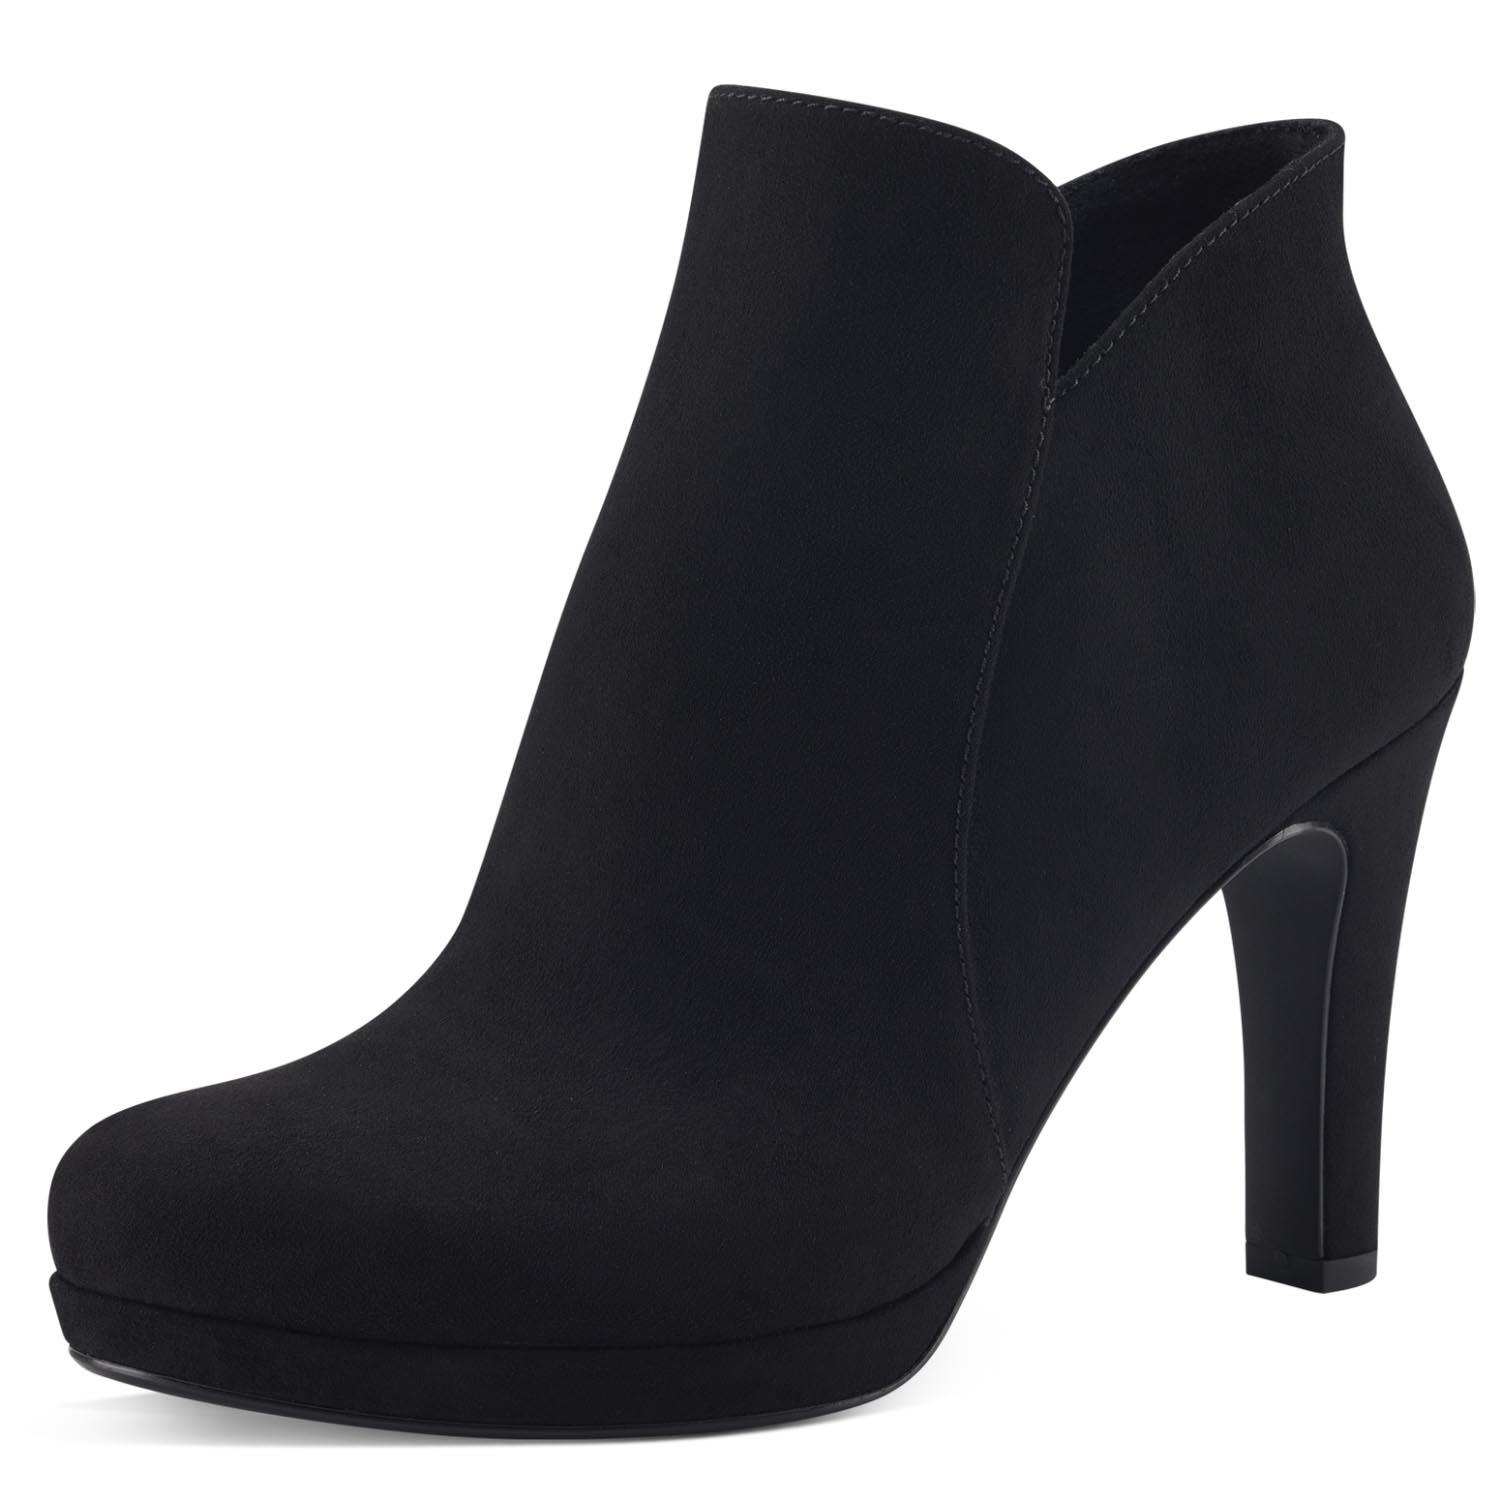 Angled view of the dressy heeled ankle boot